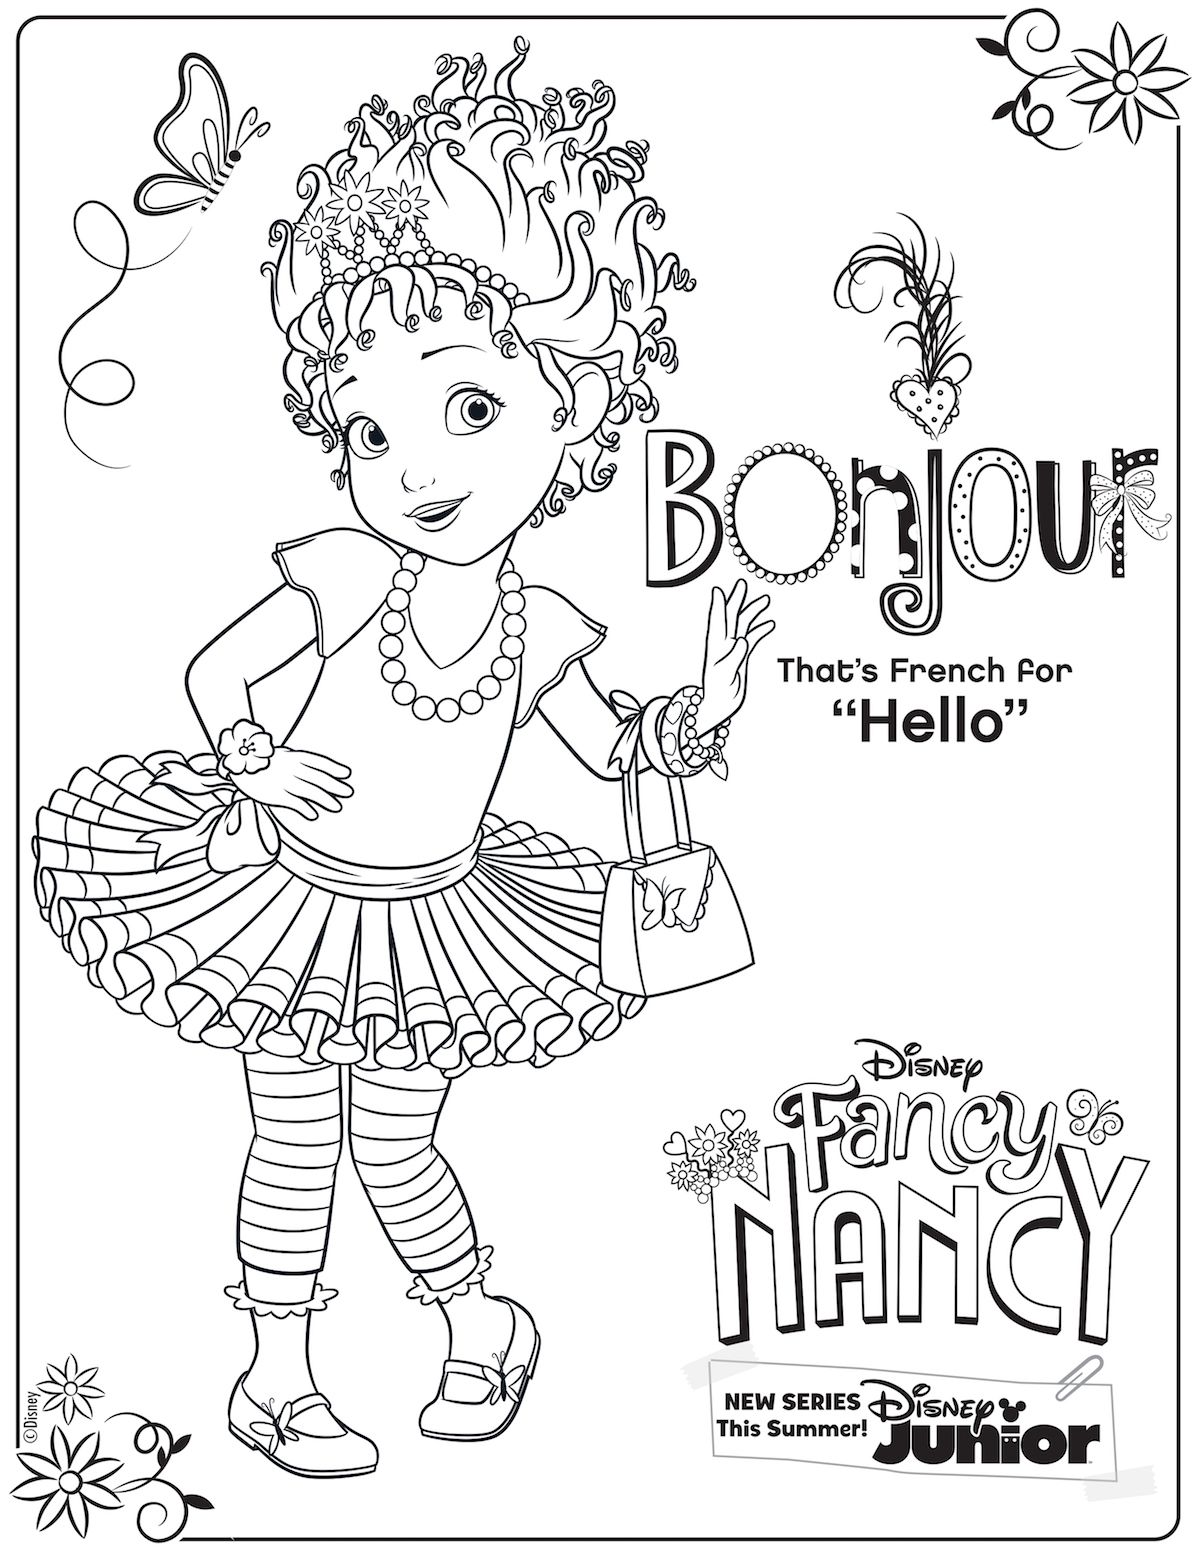 Disney.com Coloring Pages Fancy Nancy Coloring Page Activity Disney Family